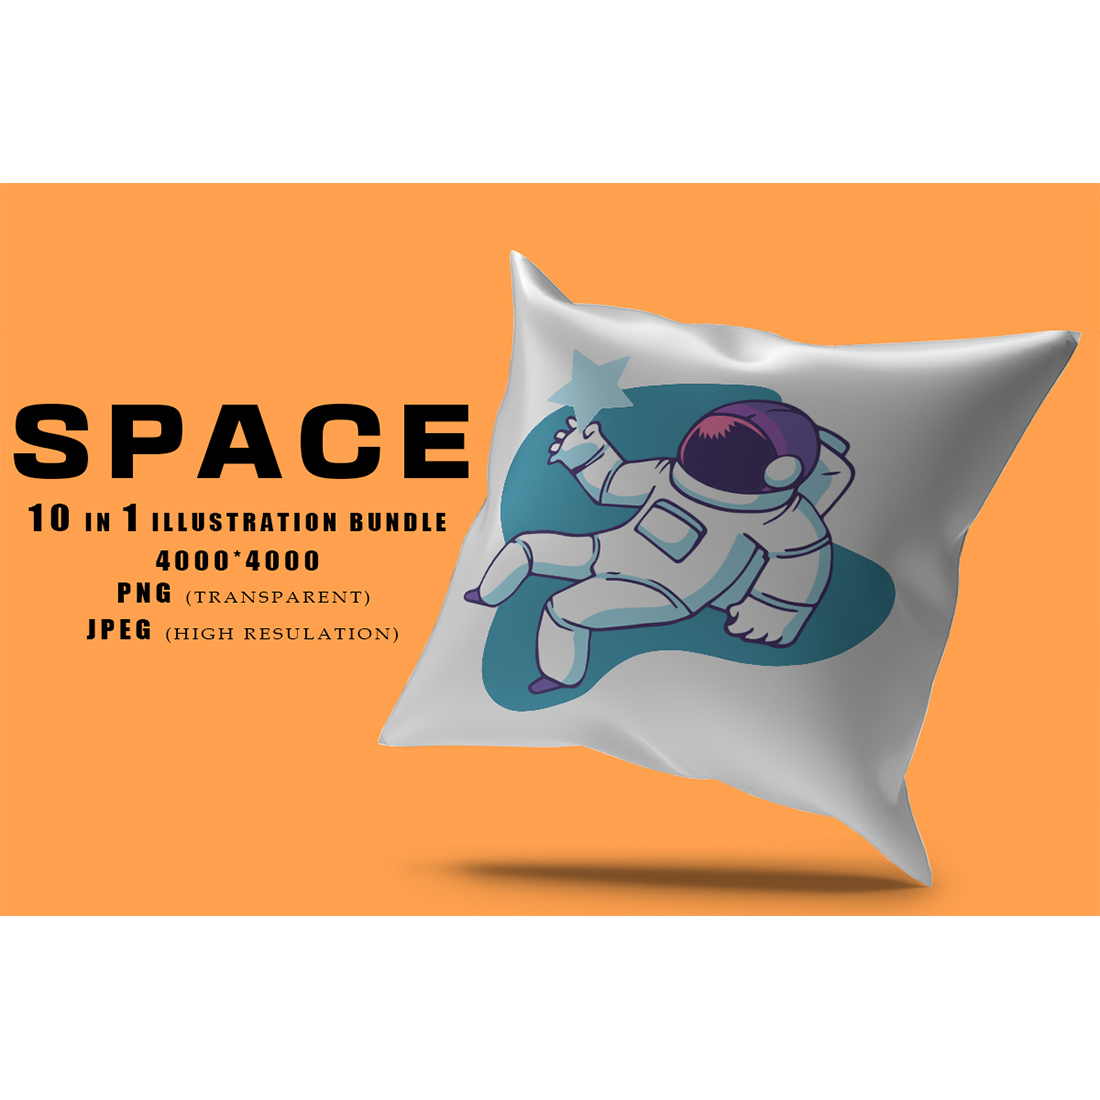 Image of a pillow with a gorgeous print on the theme of space